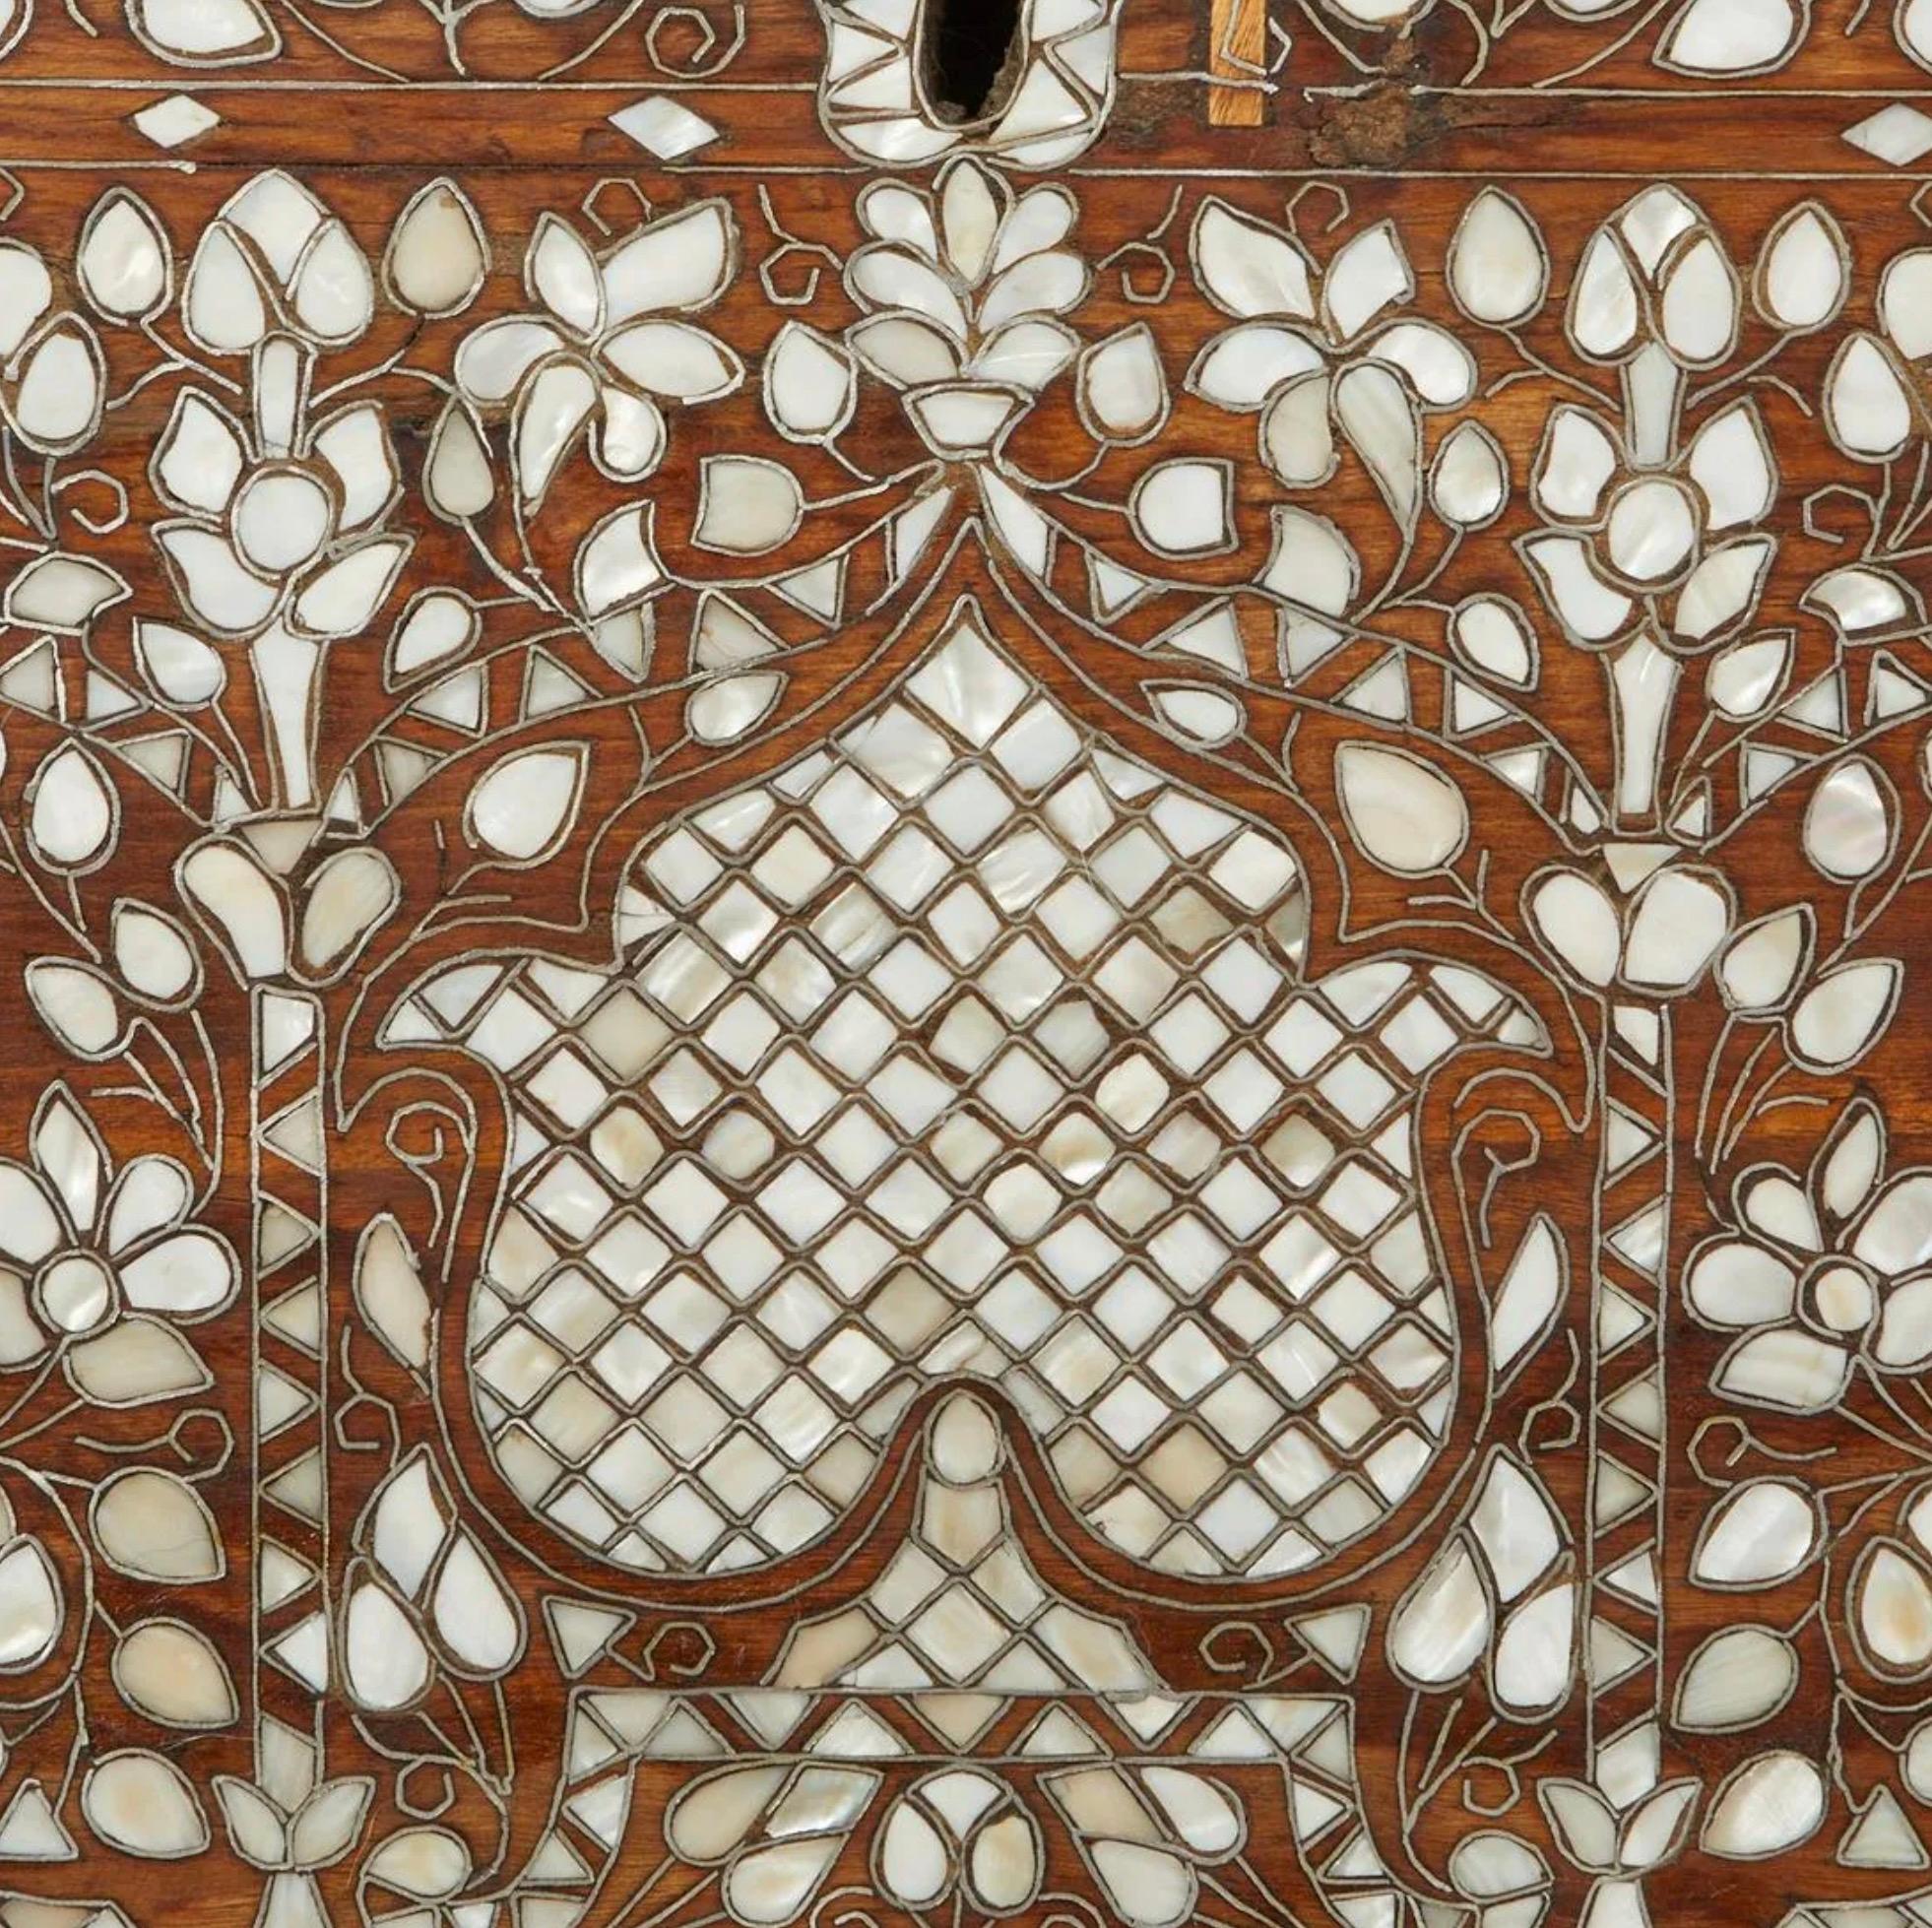 Syrian mother of pearl inlaid wooden wedding or dowry chest. The trunk is profusely inlaid with intricate geometric and floral designs in mother of pearl with the intarsia method. The lid lifts to reveal two small compartments within a larger